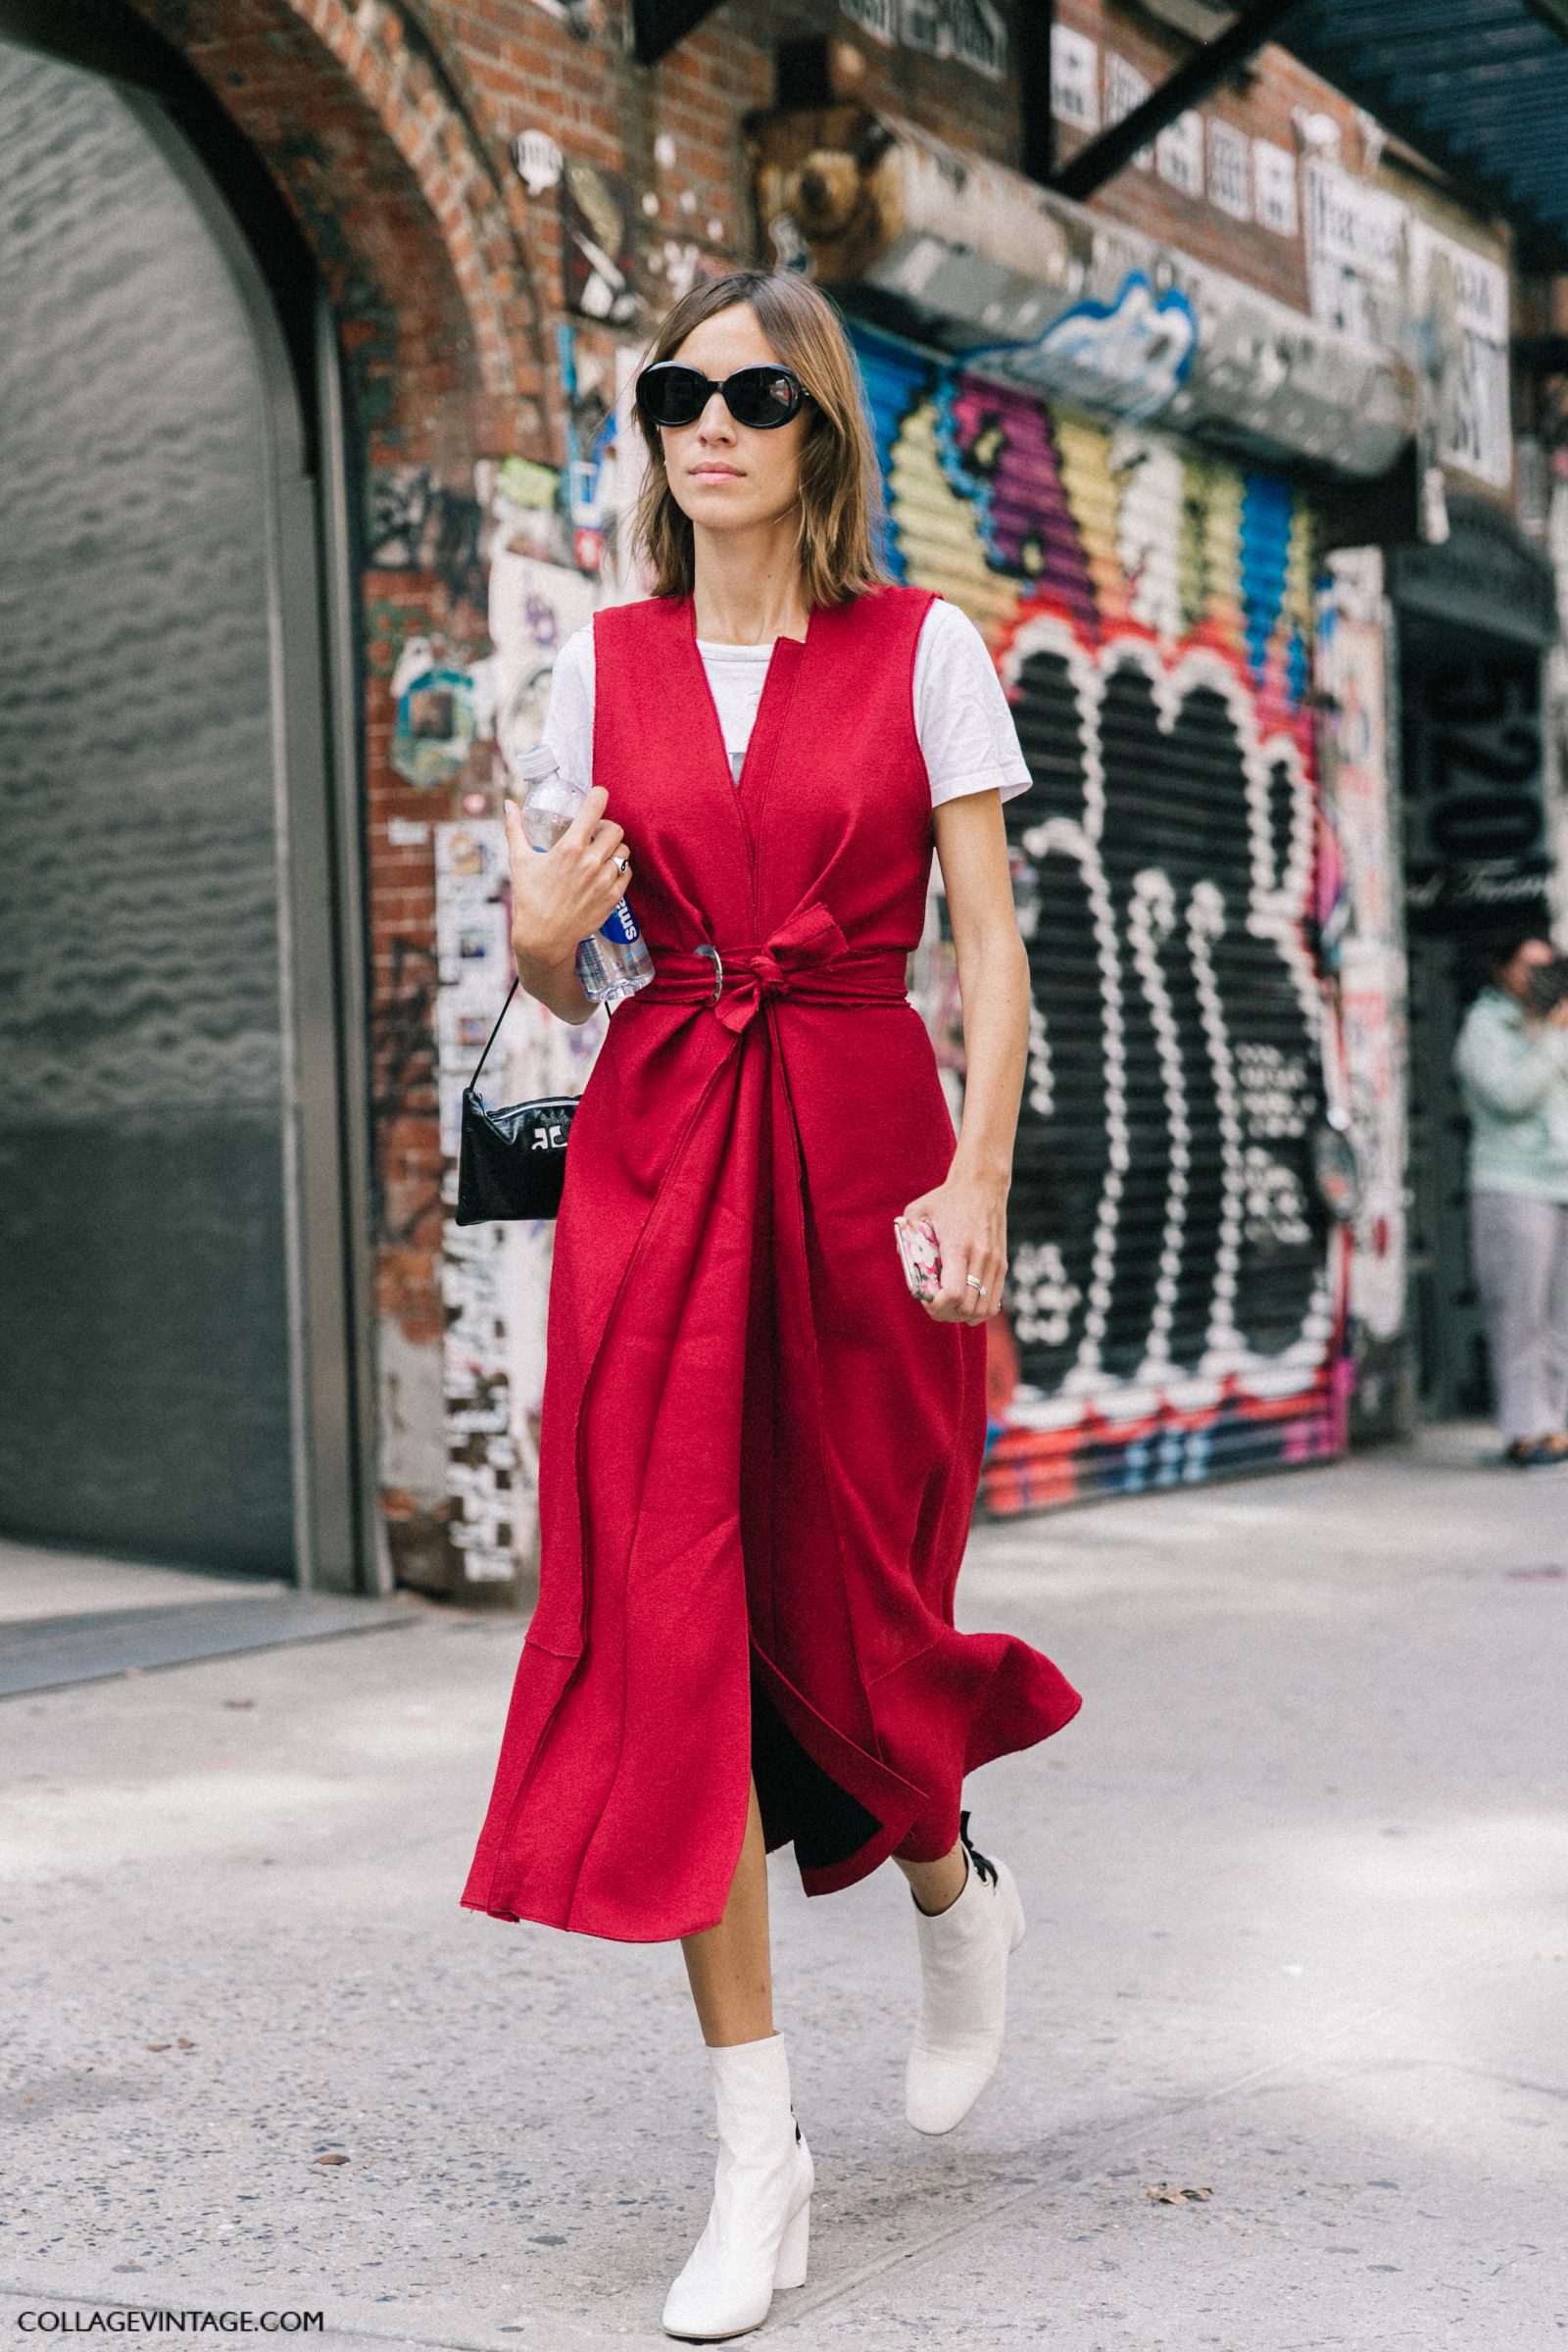 nyfw-new_york_fashion_week_ss17-street_style-outfits-collage_vintage-vintage-phillip_lim-the-row-proenza_schouler-rossie_aussolin-267